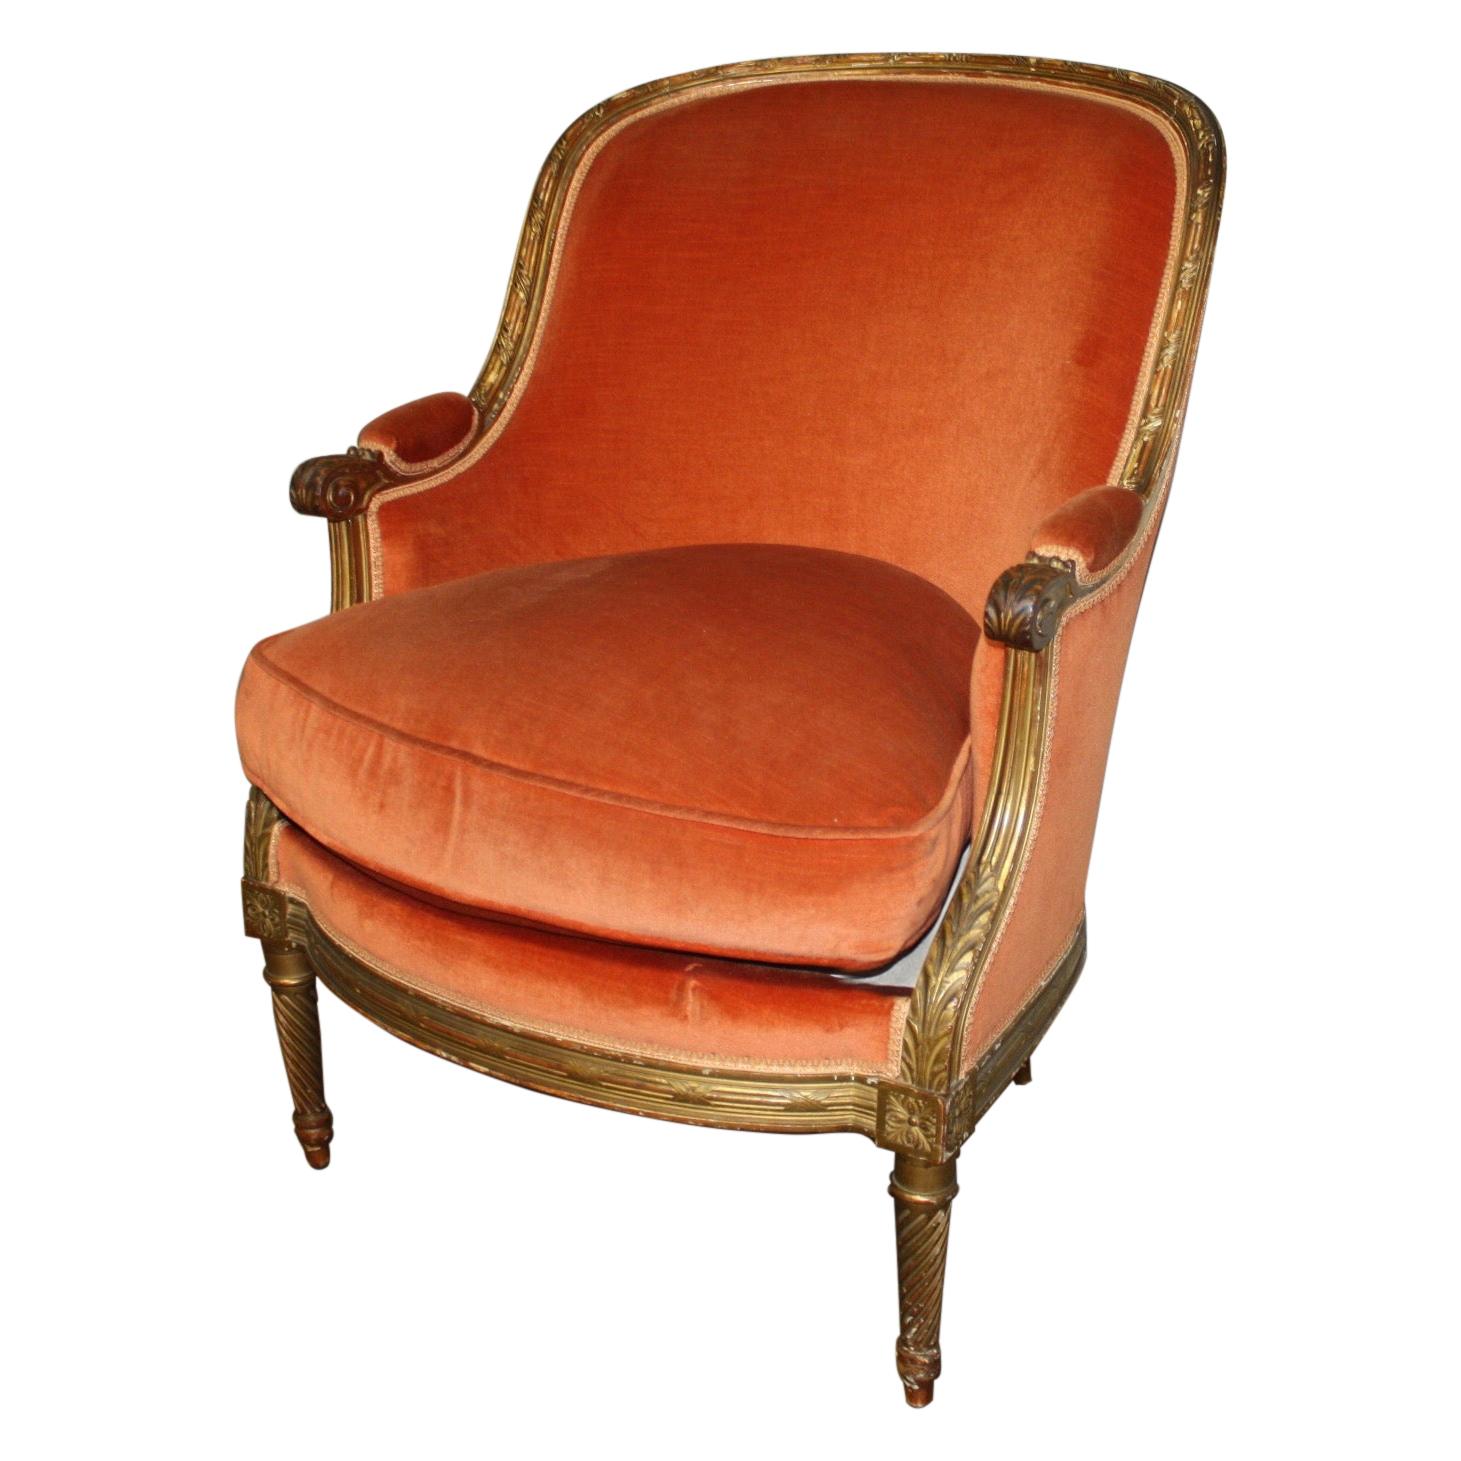 French 19th Century Louis XVI Bergere Chair